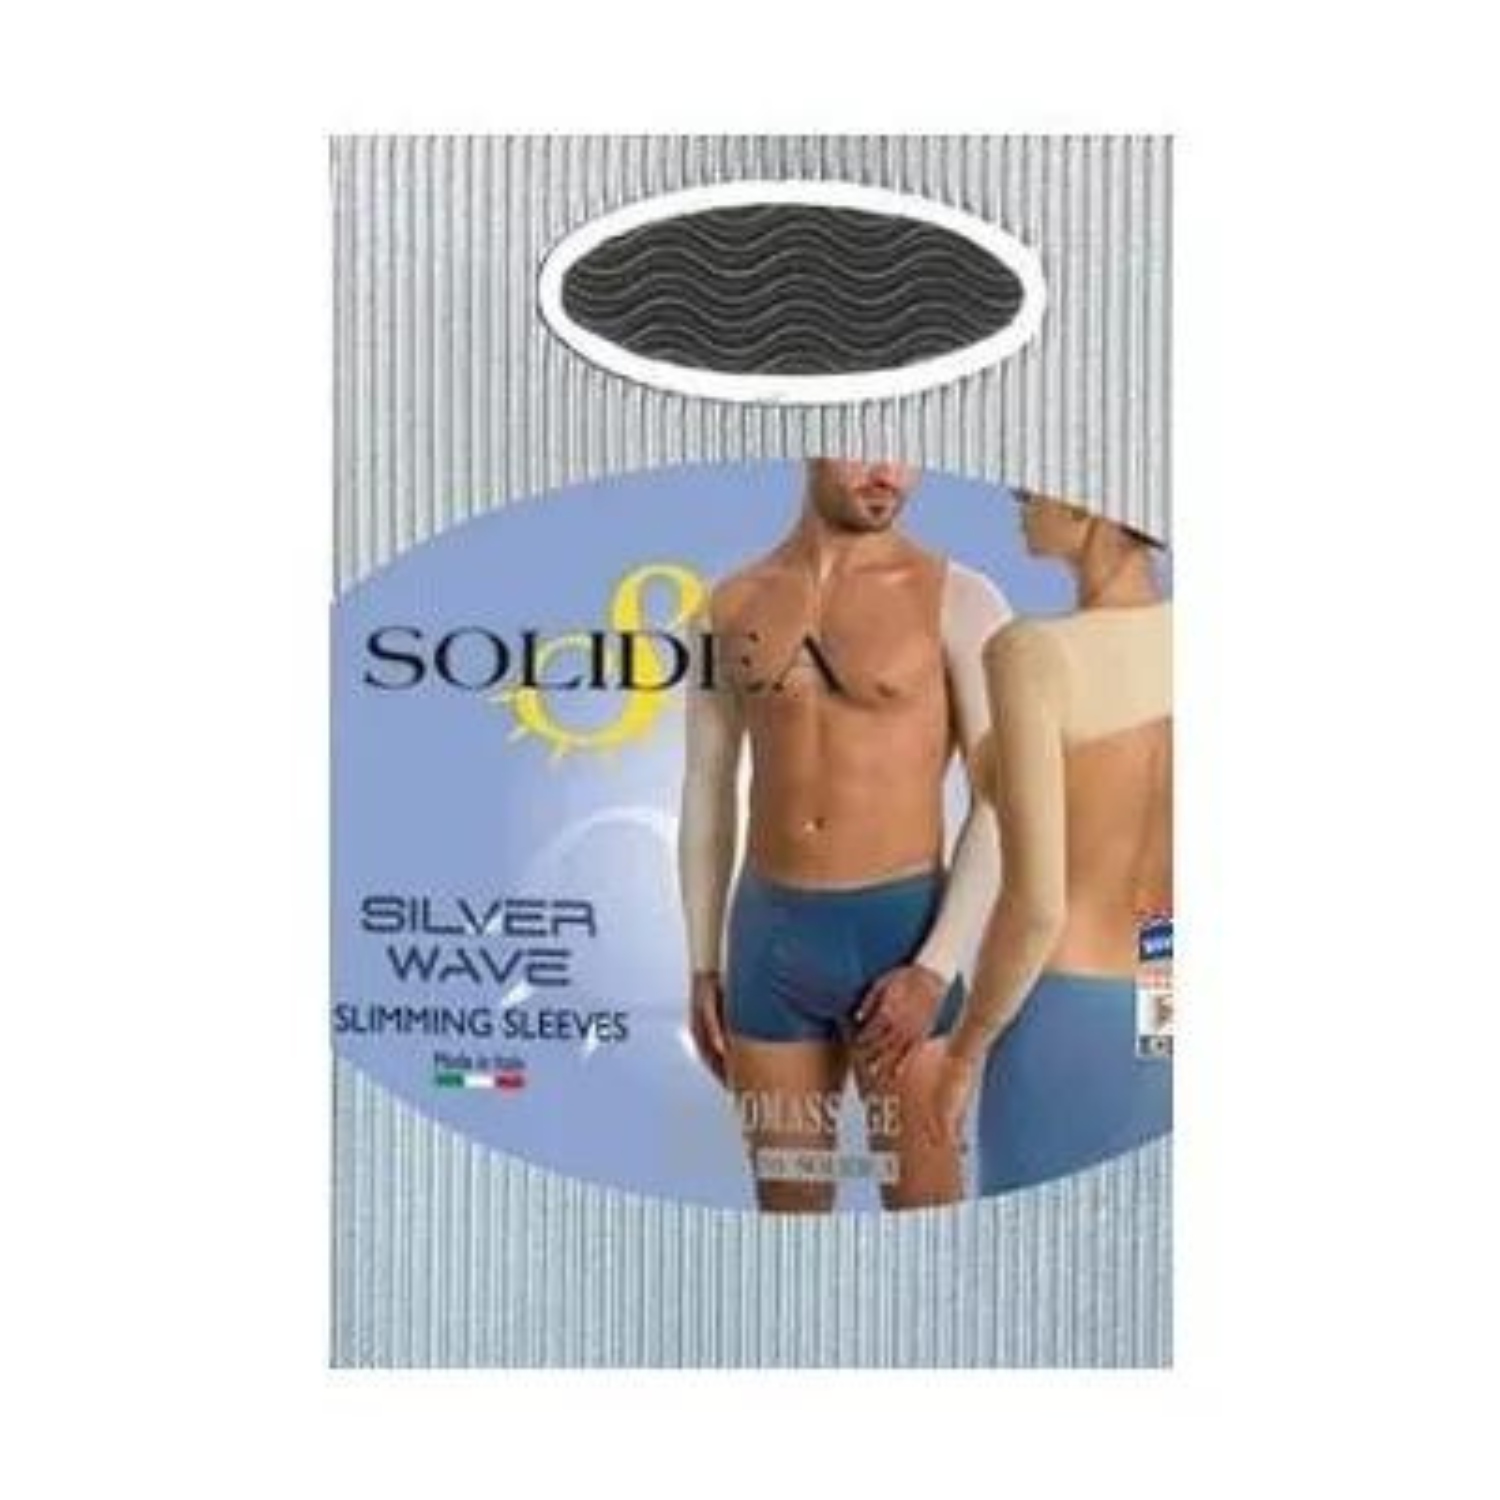 Solidea Silver Wave Slimming Slimming Sleeves 2M Camel